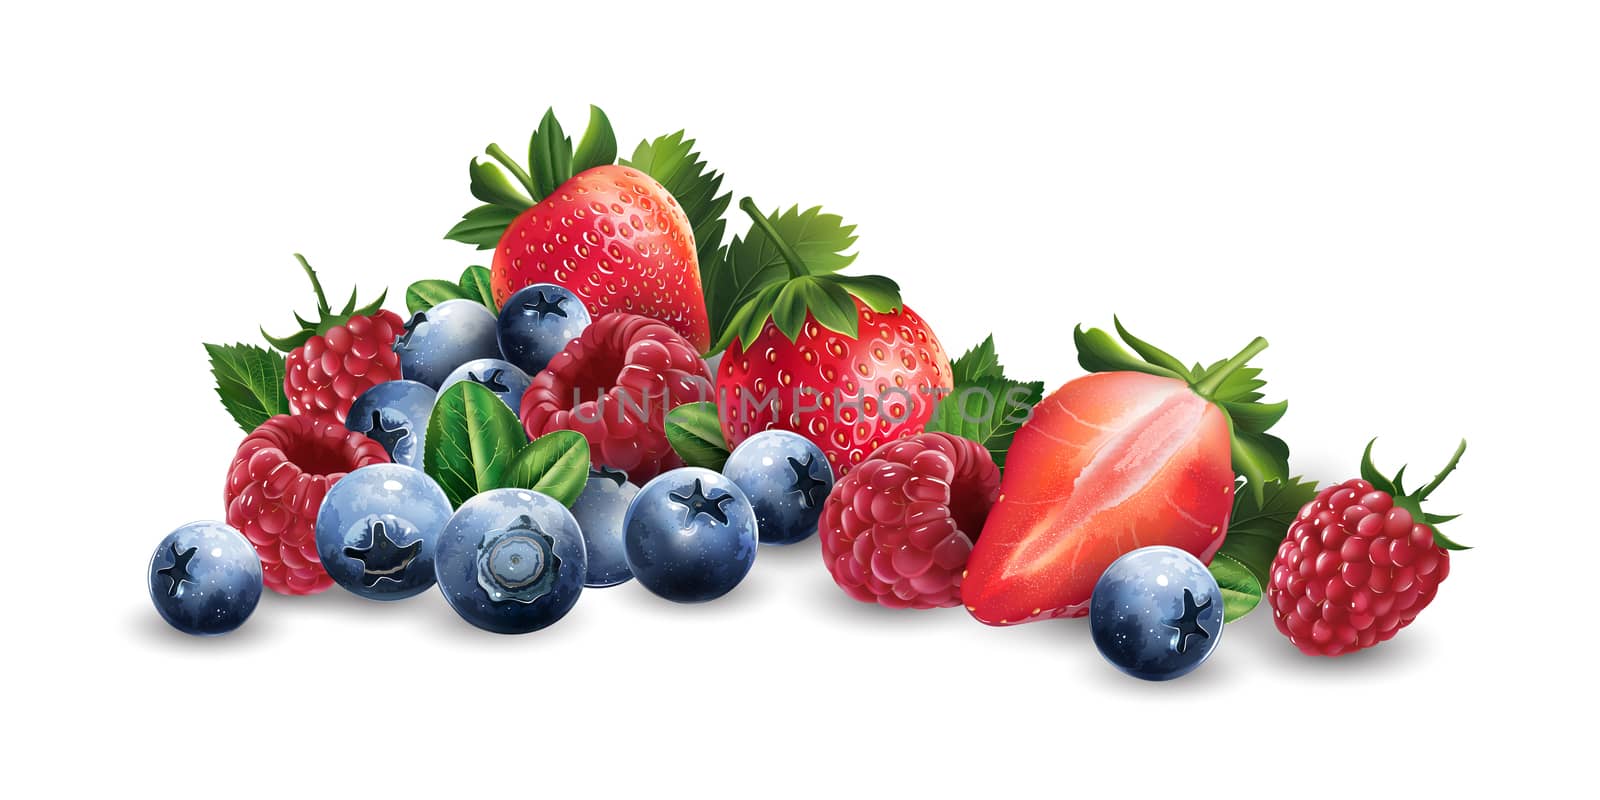 Raspberries, blueberries and strawberries on a white background.